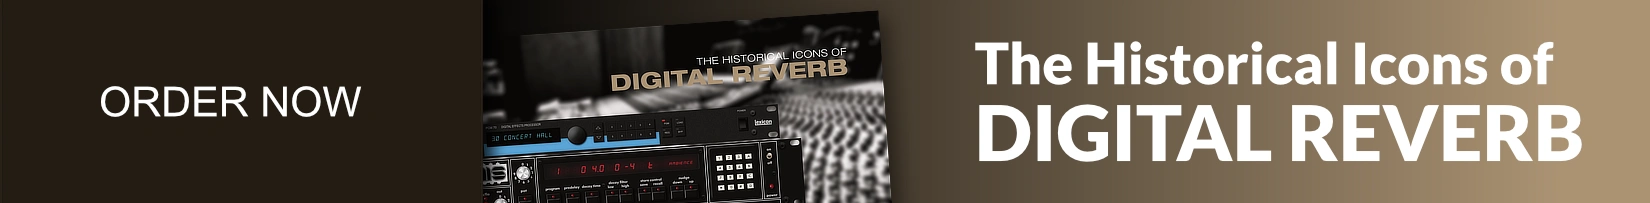 Historical Icons of Digital Reverb